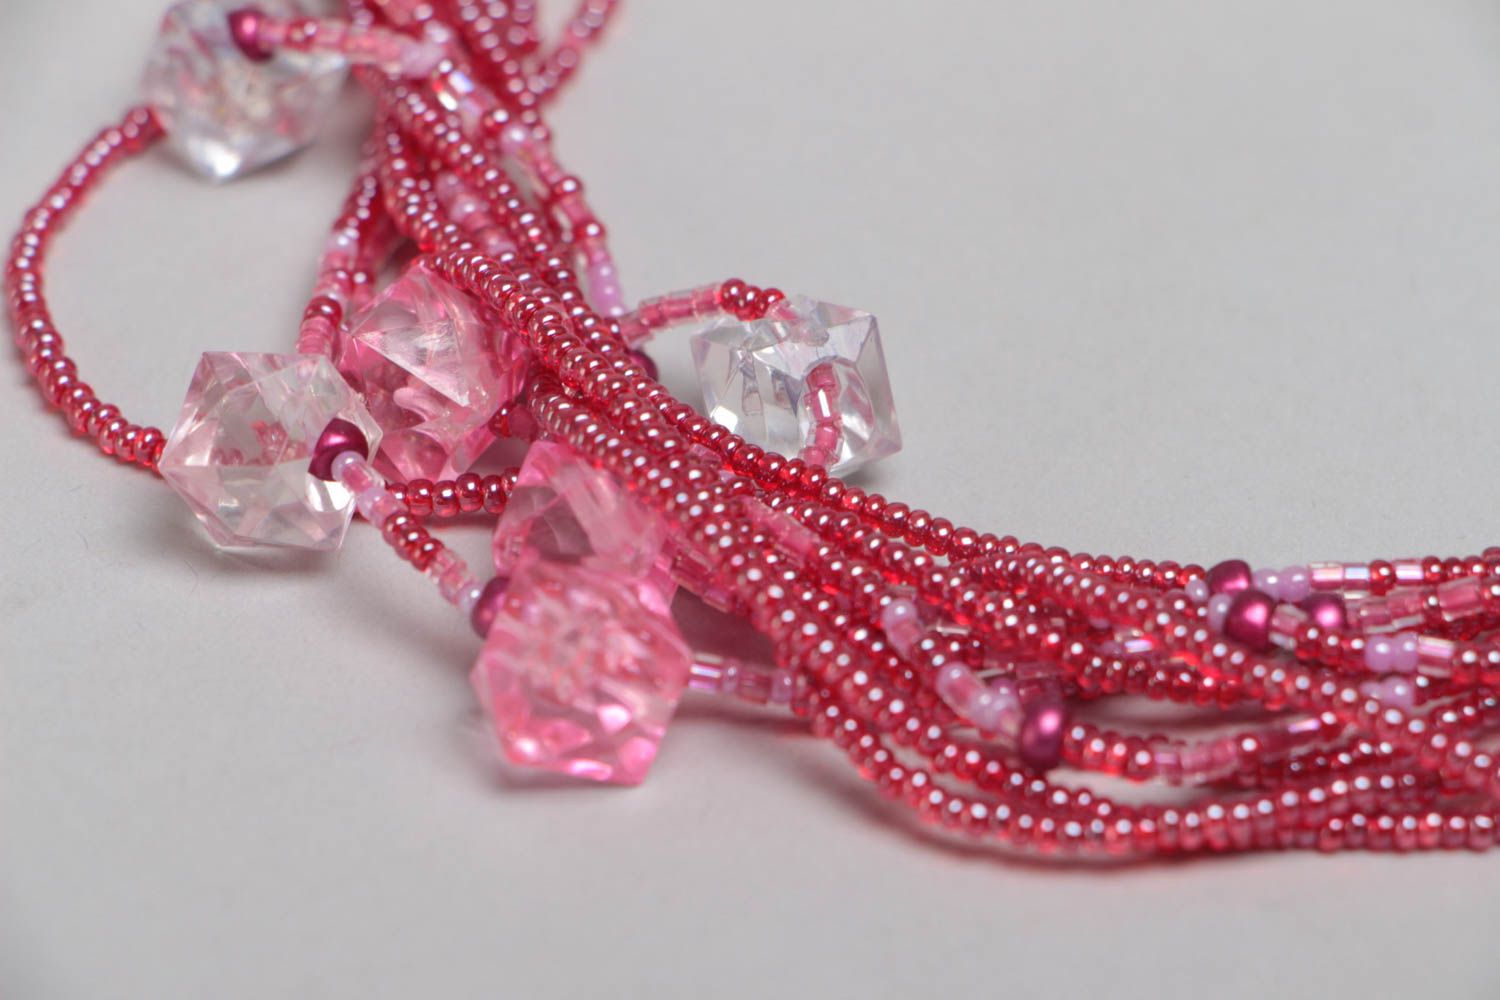 Handmade designer multi row pink beaded women's necklace with faceted beads photo 3